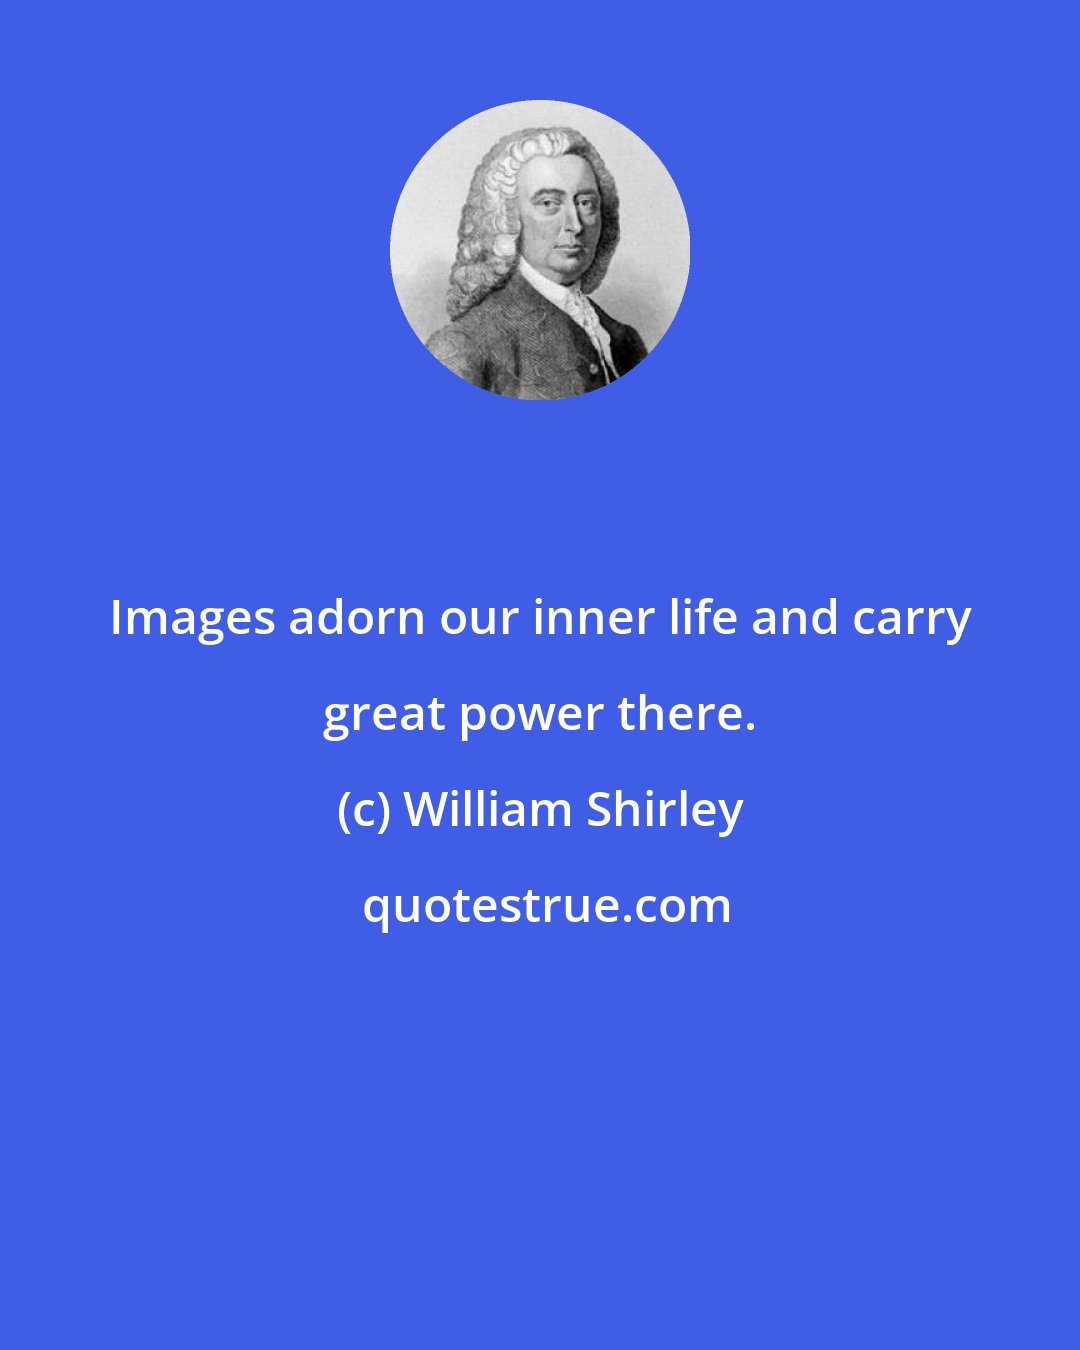 William Shirley: Images adorn our inner life and carry great power there.